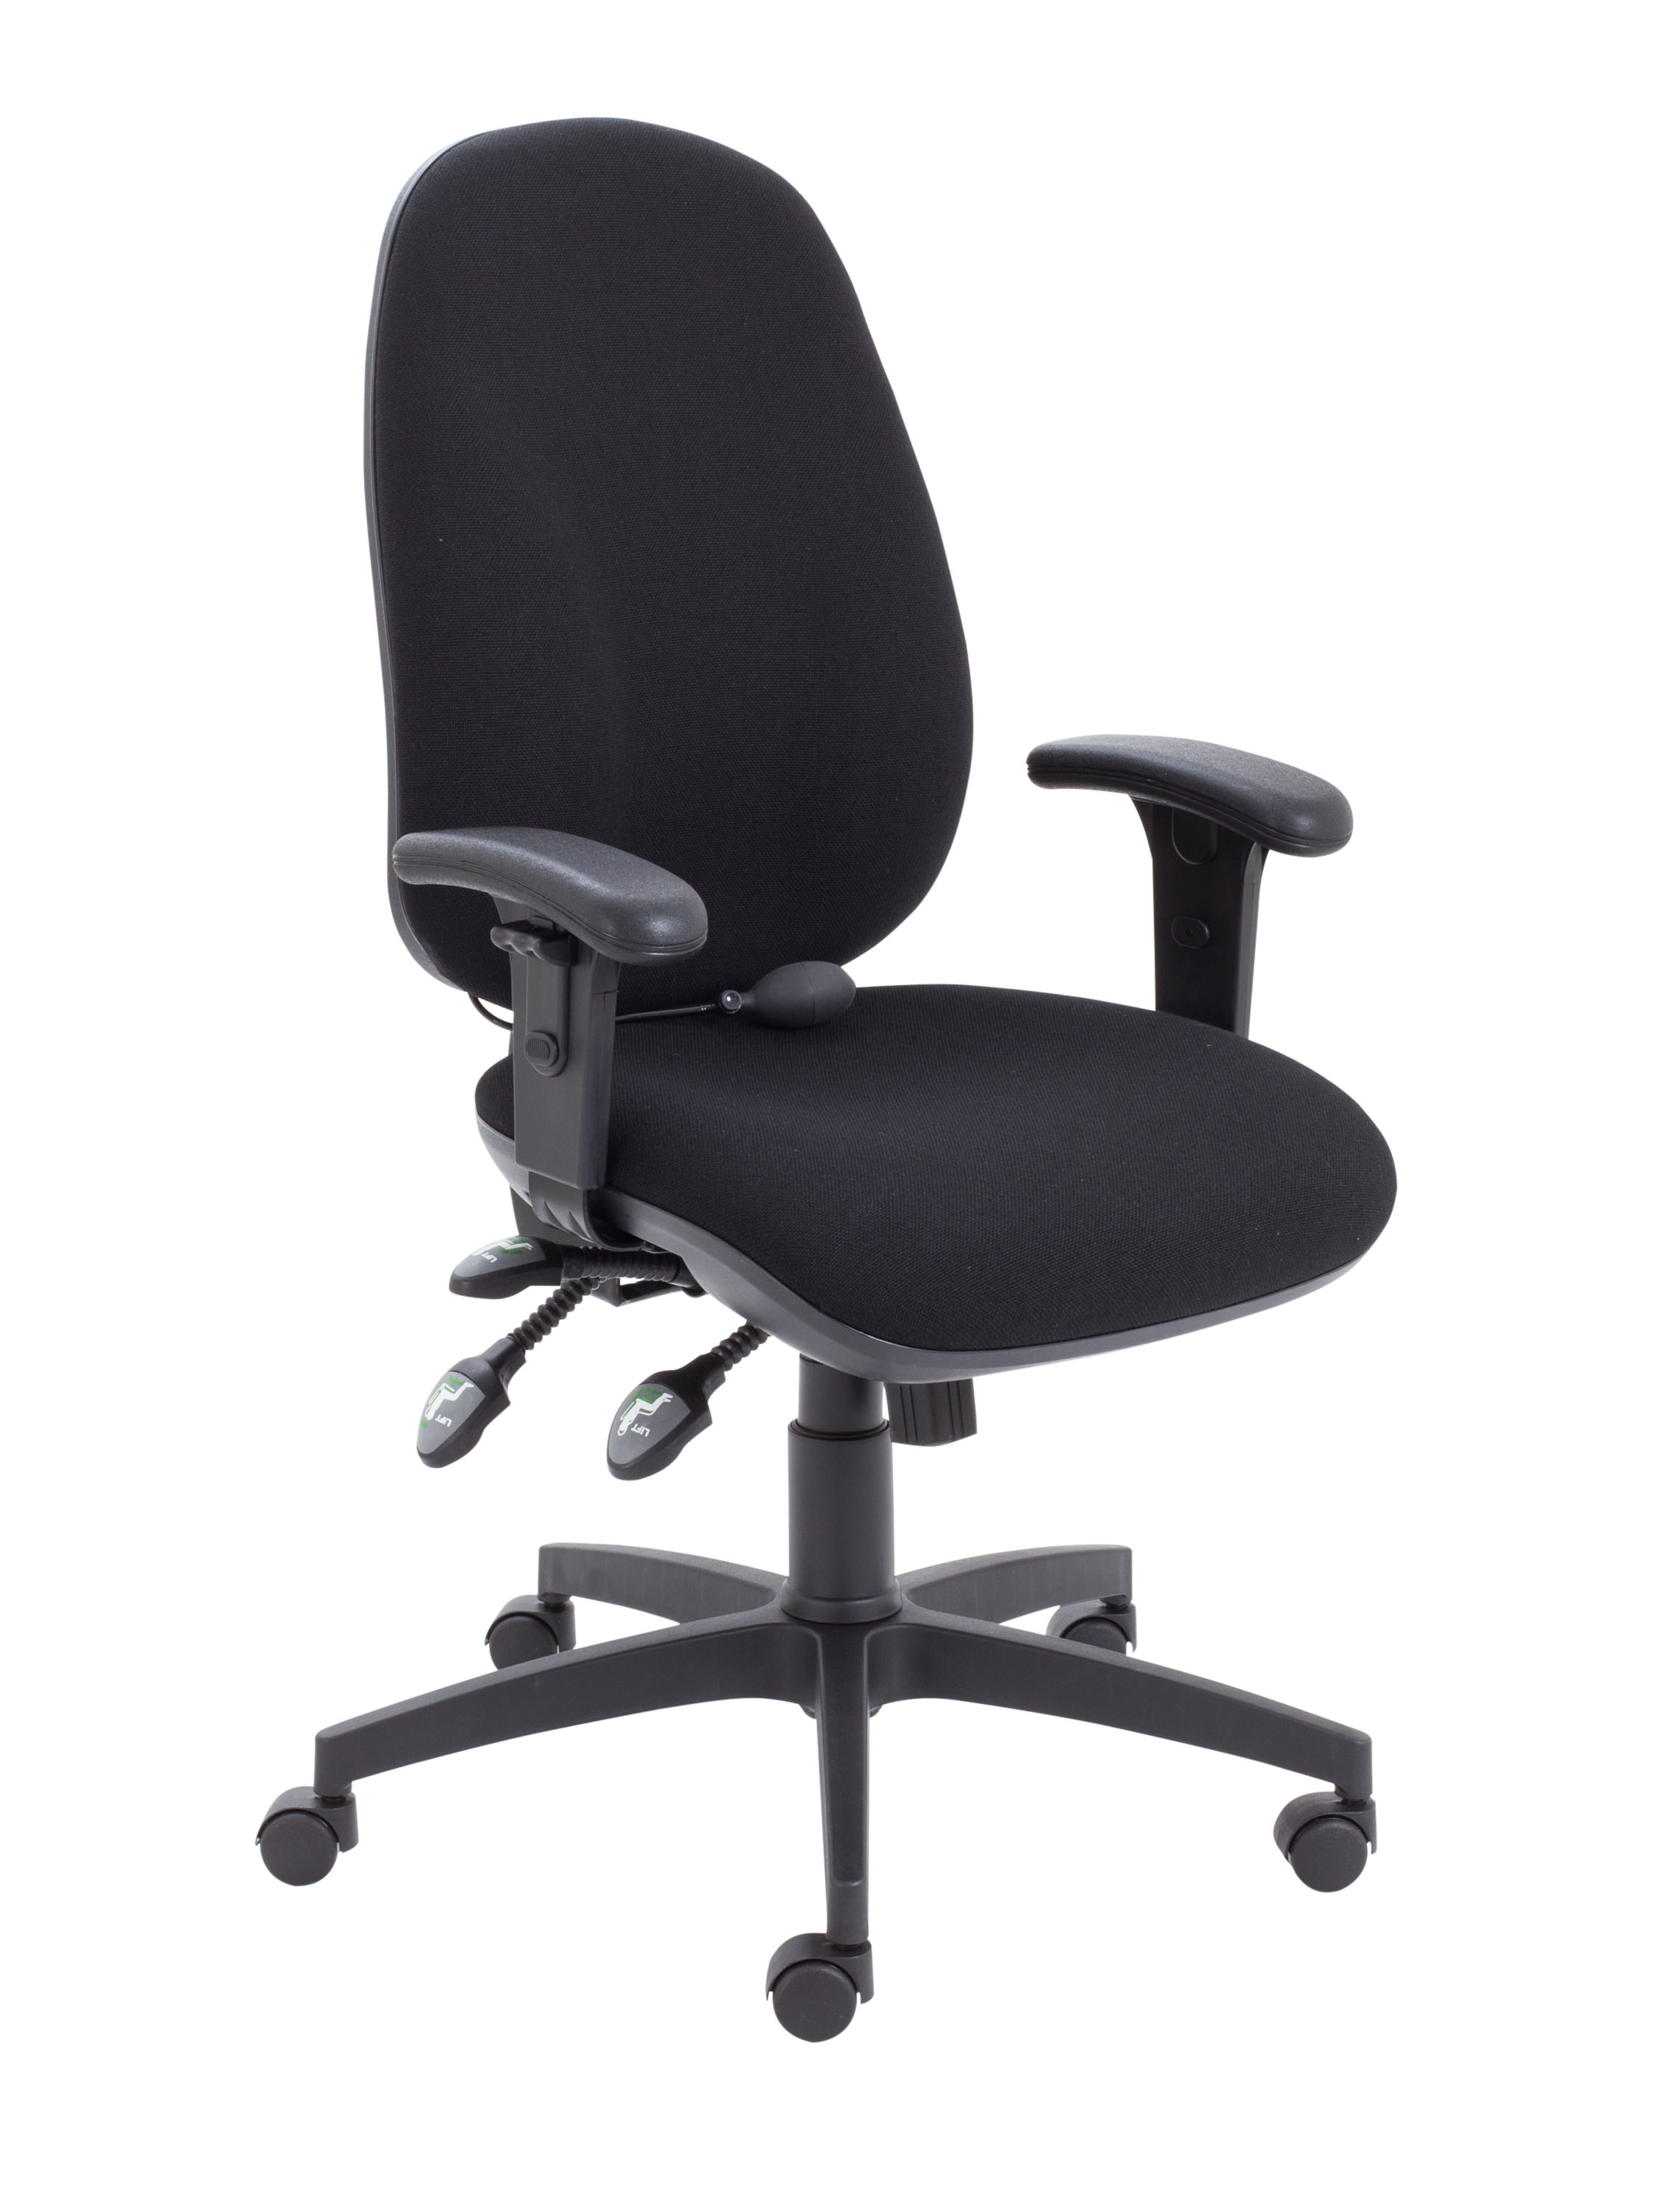 Maxi Ergo Chair With T Adjustable Arms - Black